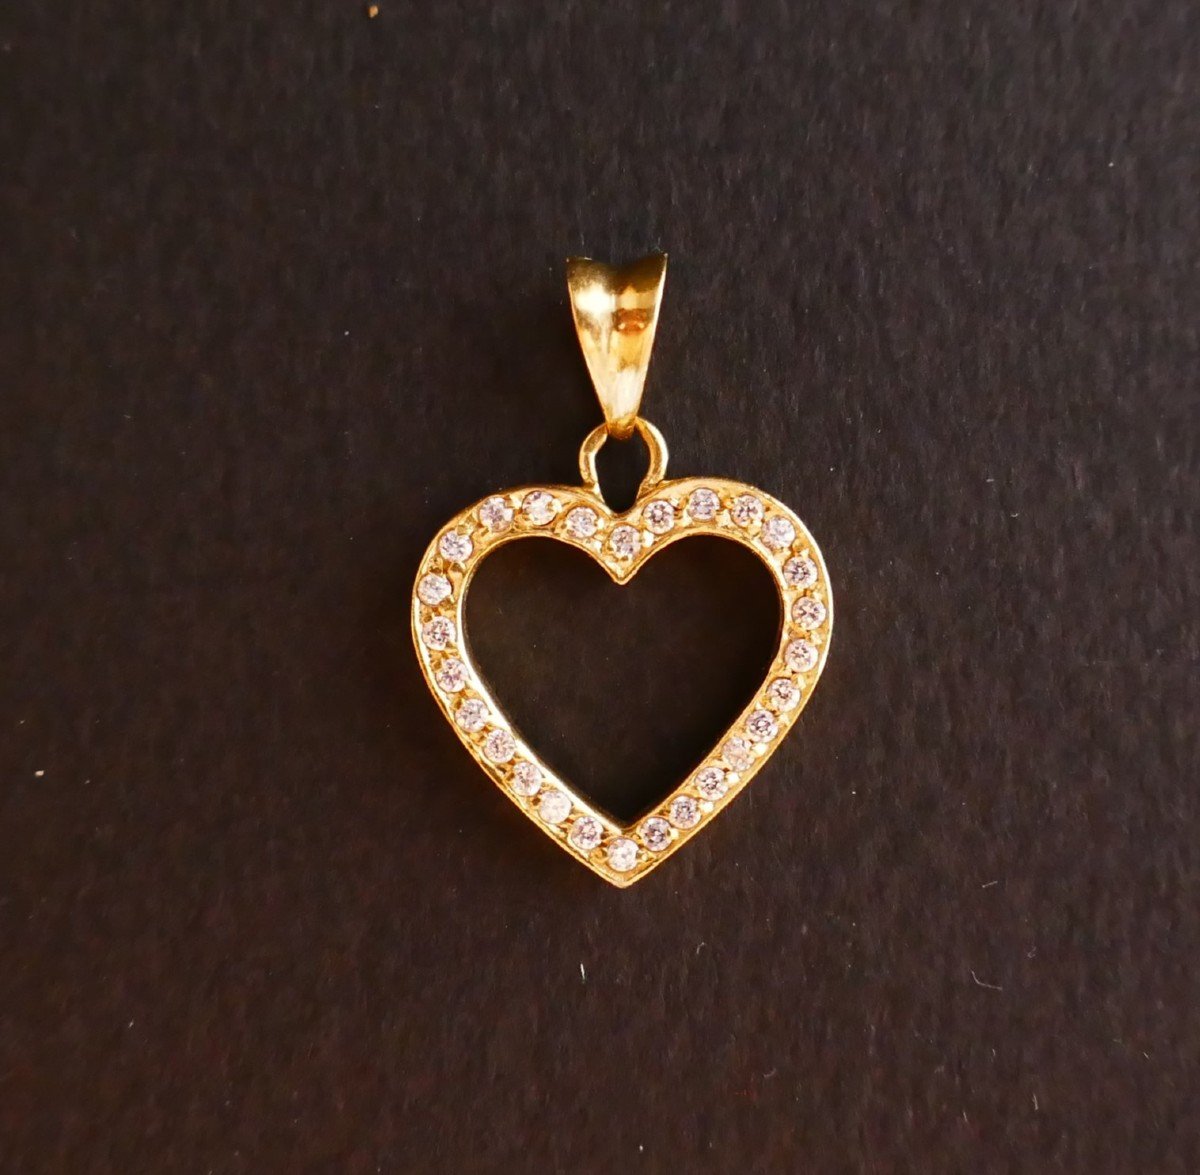 Heart Pendant Set With White Sapphires, 18-carat Gold Chain.-photo-2